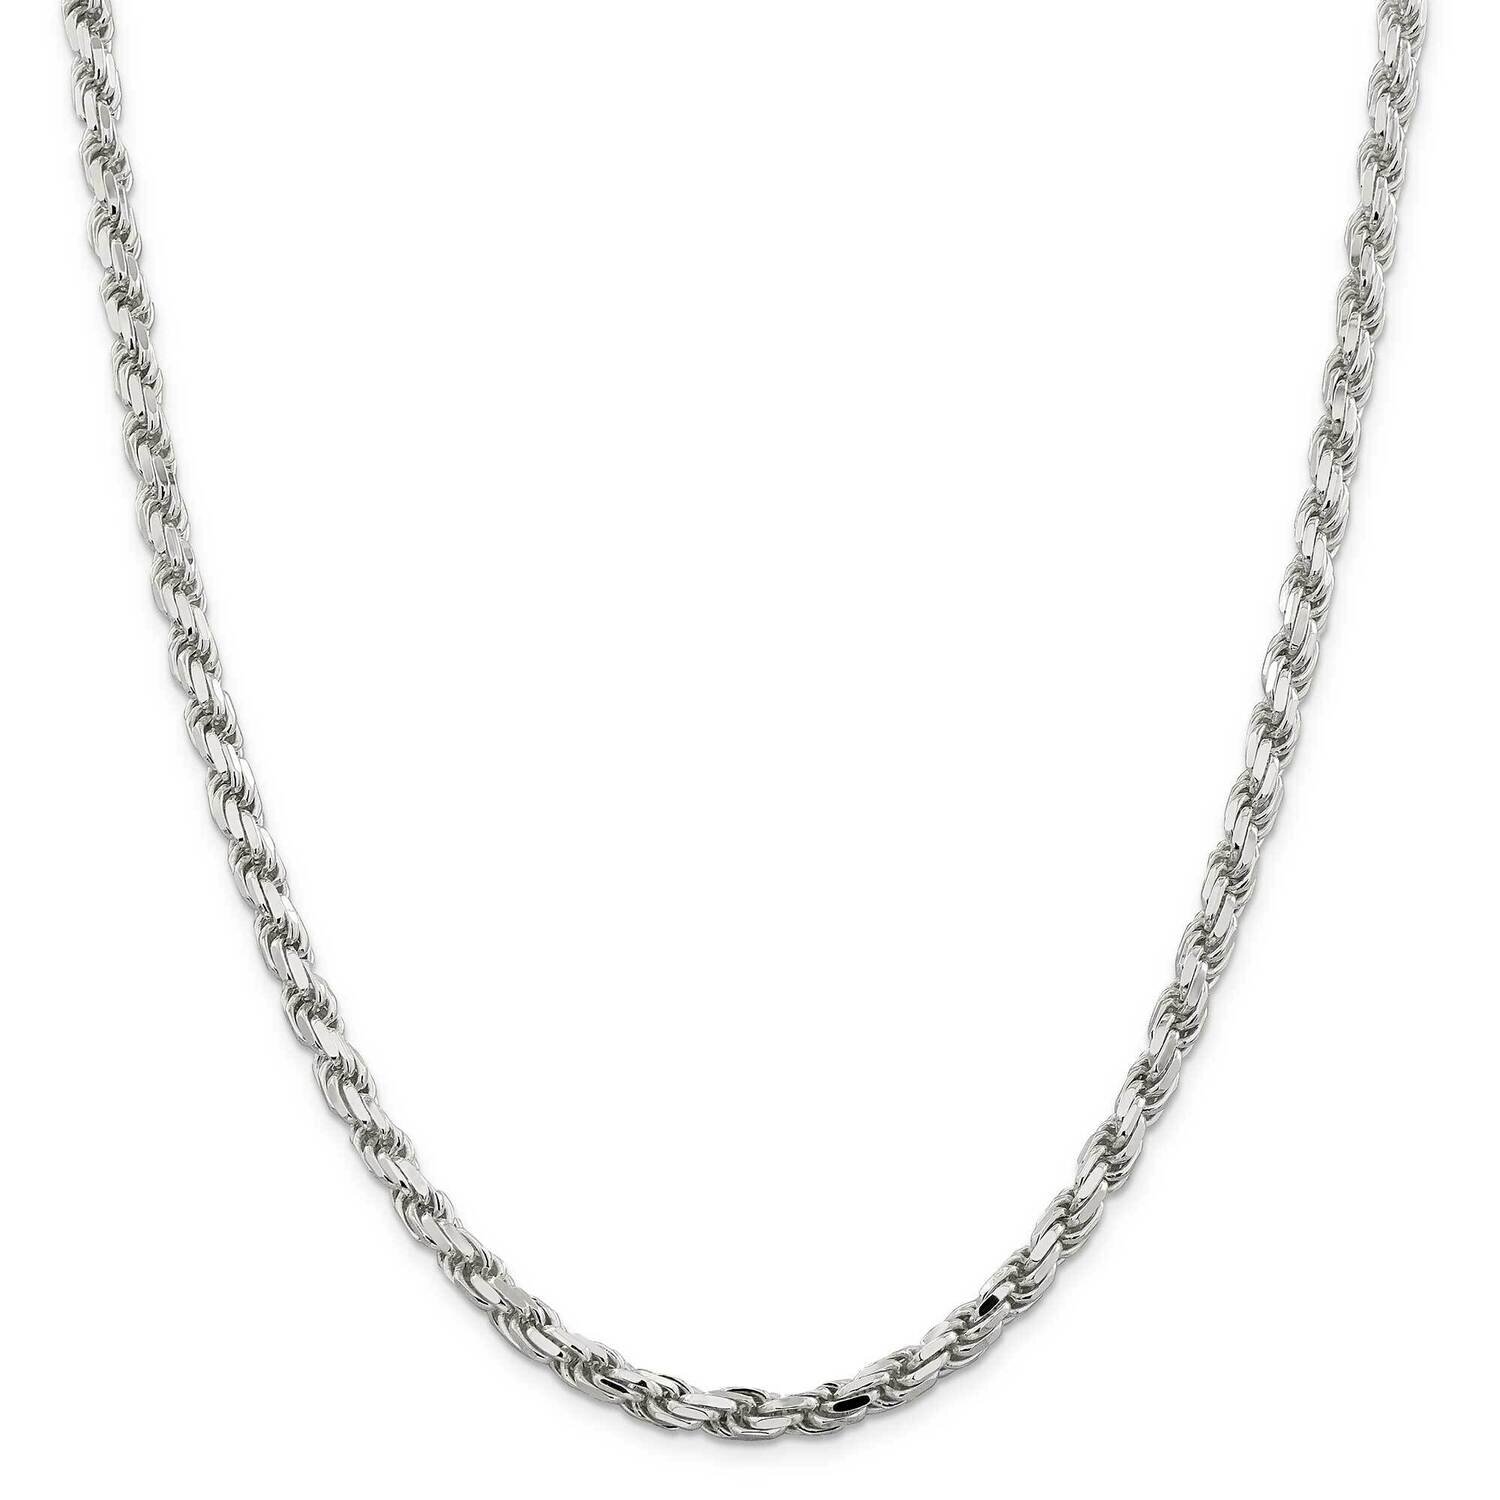 5.75mm Diamond-Cut Rope Chain 26 Inch Sterling Silver QDC120-26